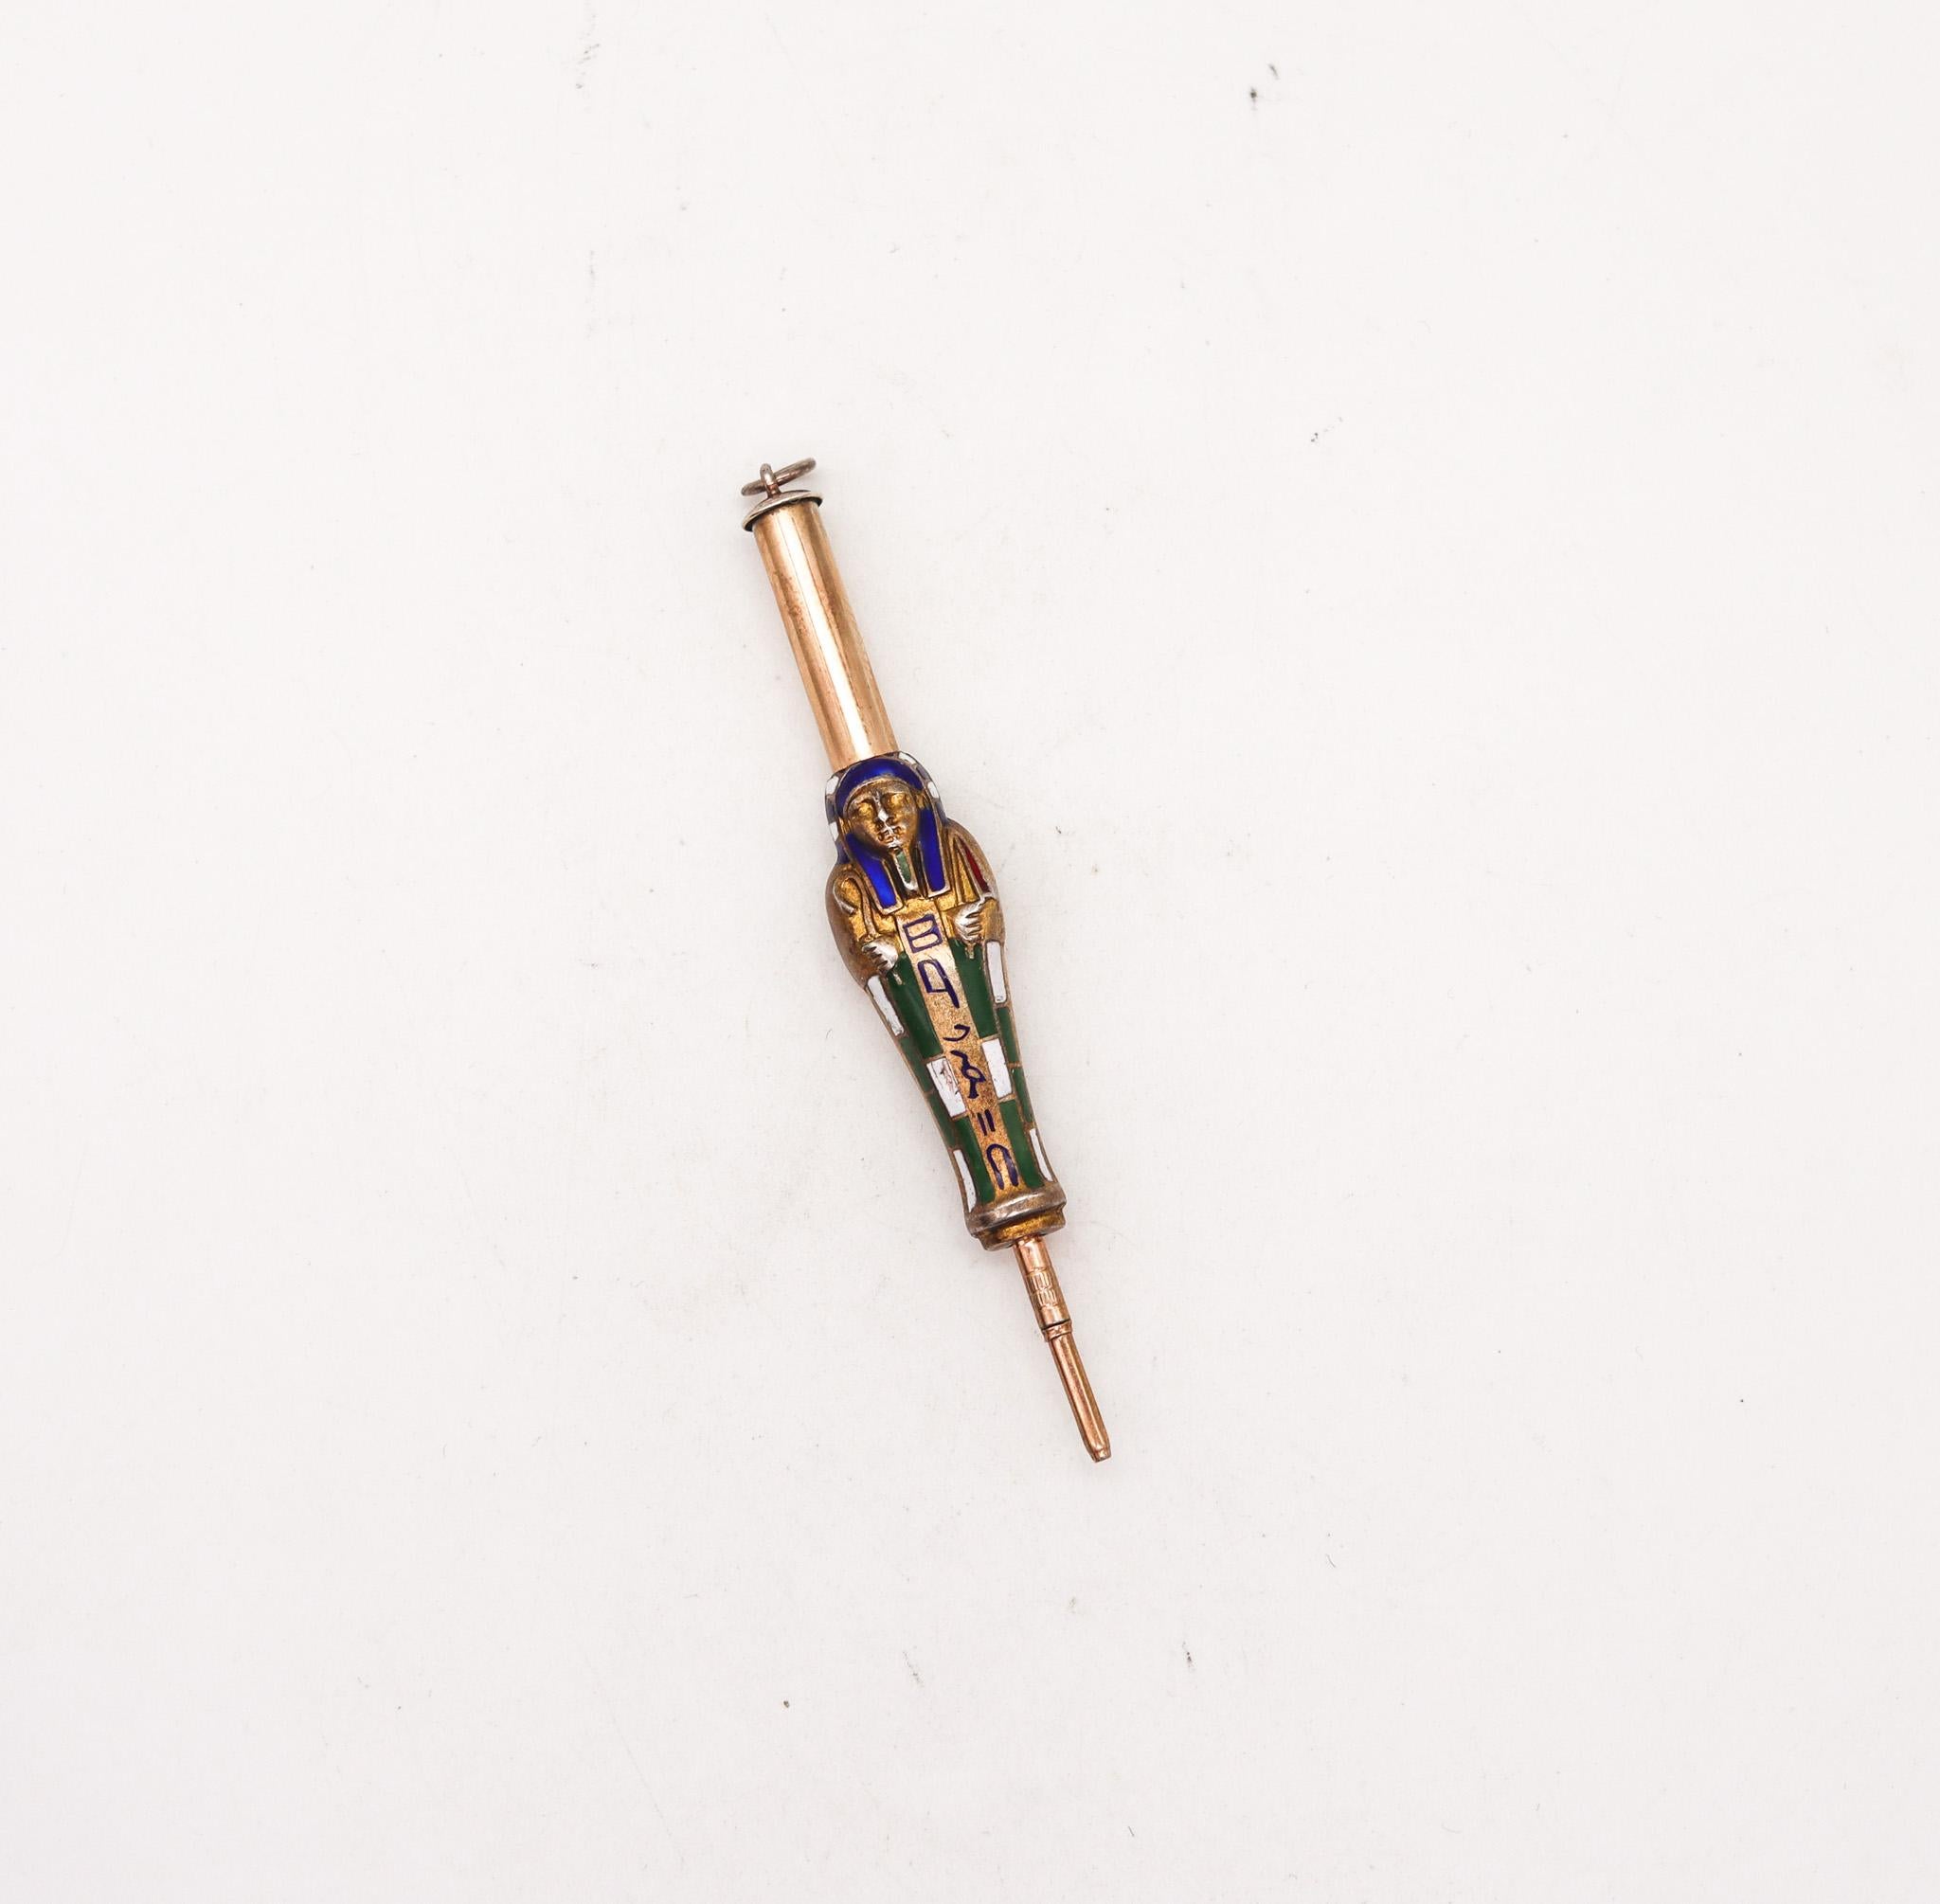 Egyptian revival Pharaoh sarcophagus pencil designed by Hans Aigner.

Fantastic miniature pendant-pencil, created at the silversmith atelier of Hans Aigner in Vienna Austria during the art deco period, back in the 1913-1920. This beautiful